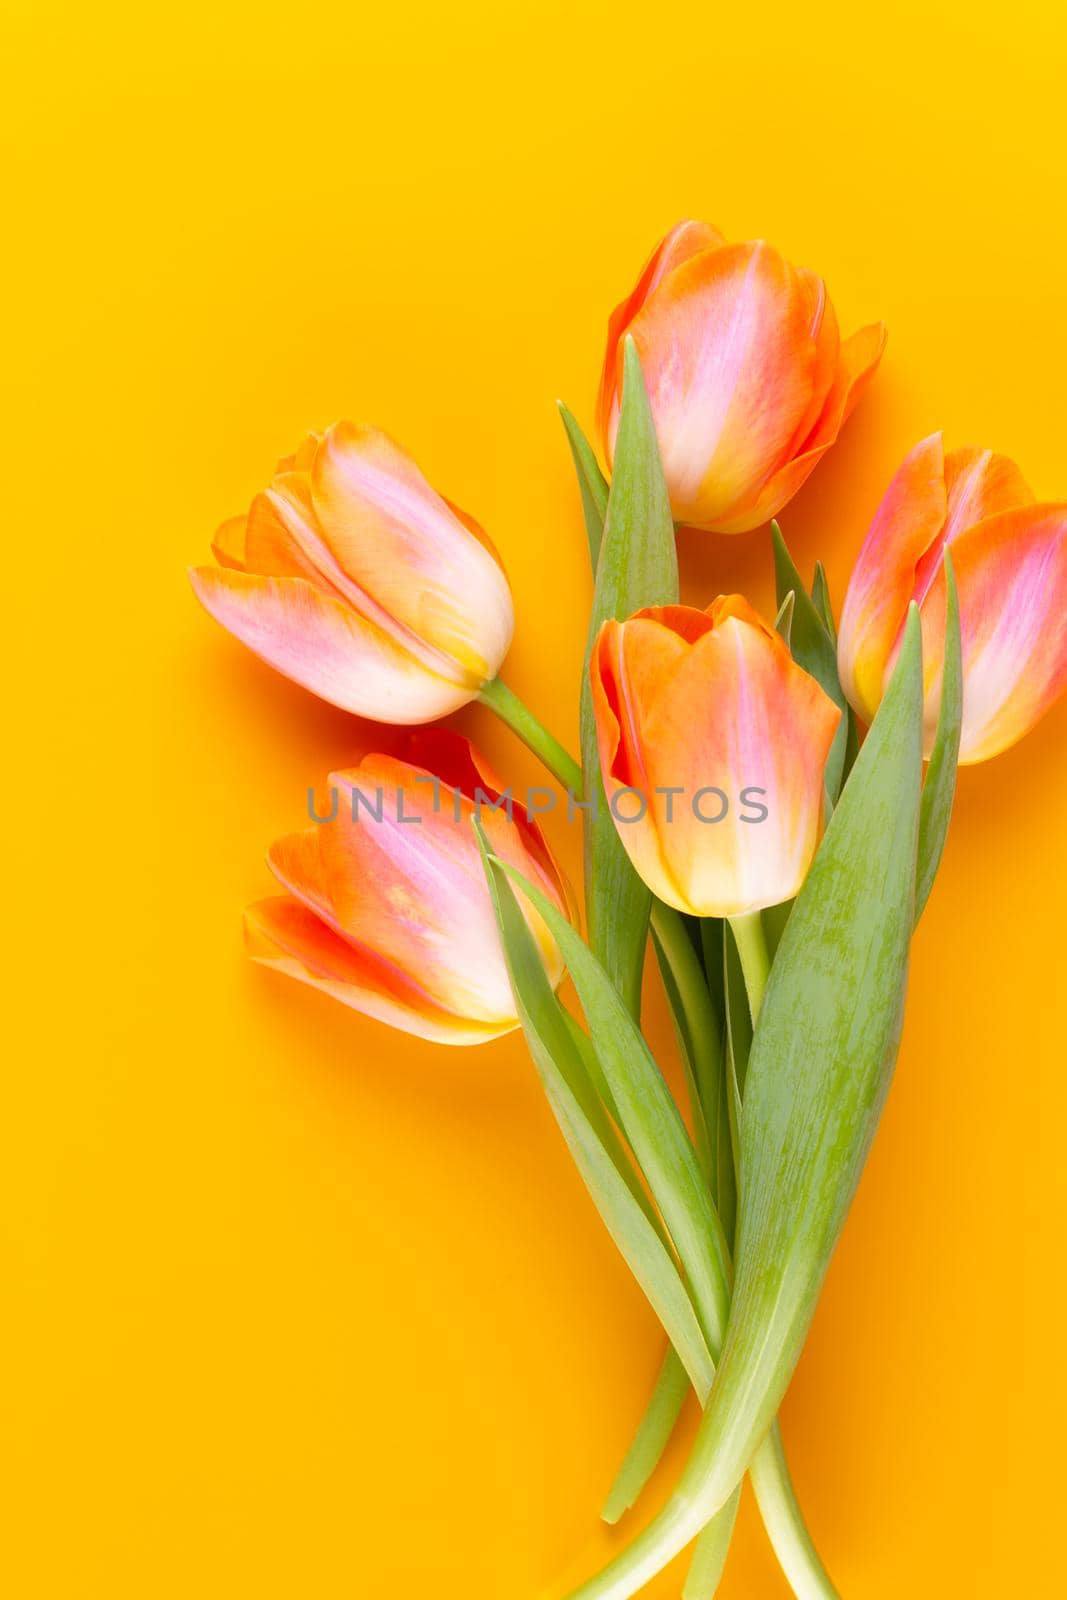 Yellow pastels color flowers on yellow background.Waiting for spring. Happy Easter card. Flat lay, top view. Copy space.